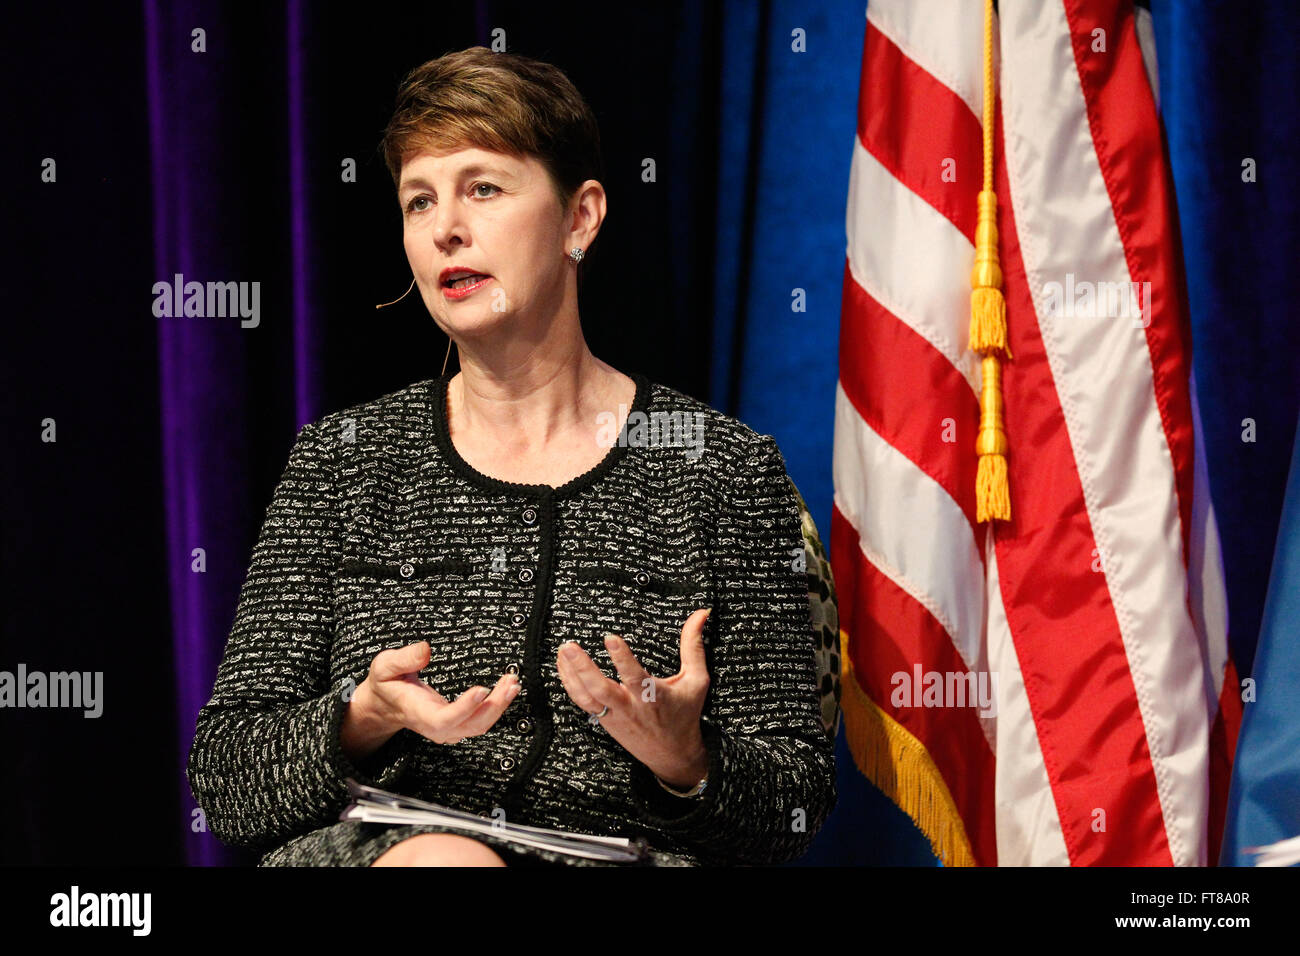 Assistant Commissioner of the Office of International Trade, CBP, Brenda Smith offers her thoughts during a panel discussion titled 'Borders Reimagined' at the 2015 East Coast Trade Symposium held in Baltimore, Md., Nov. 4, 2015. (U.S. Customs and Border Protection Photo by Glenn Fawcett) Stock Photo